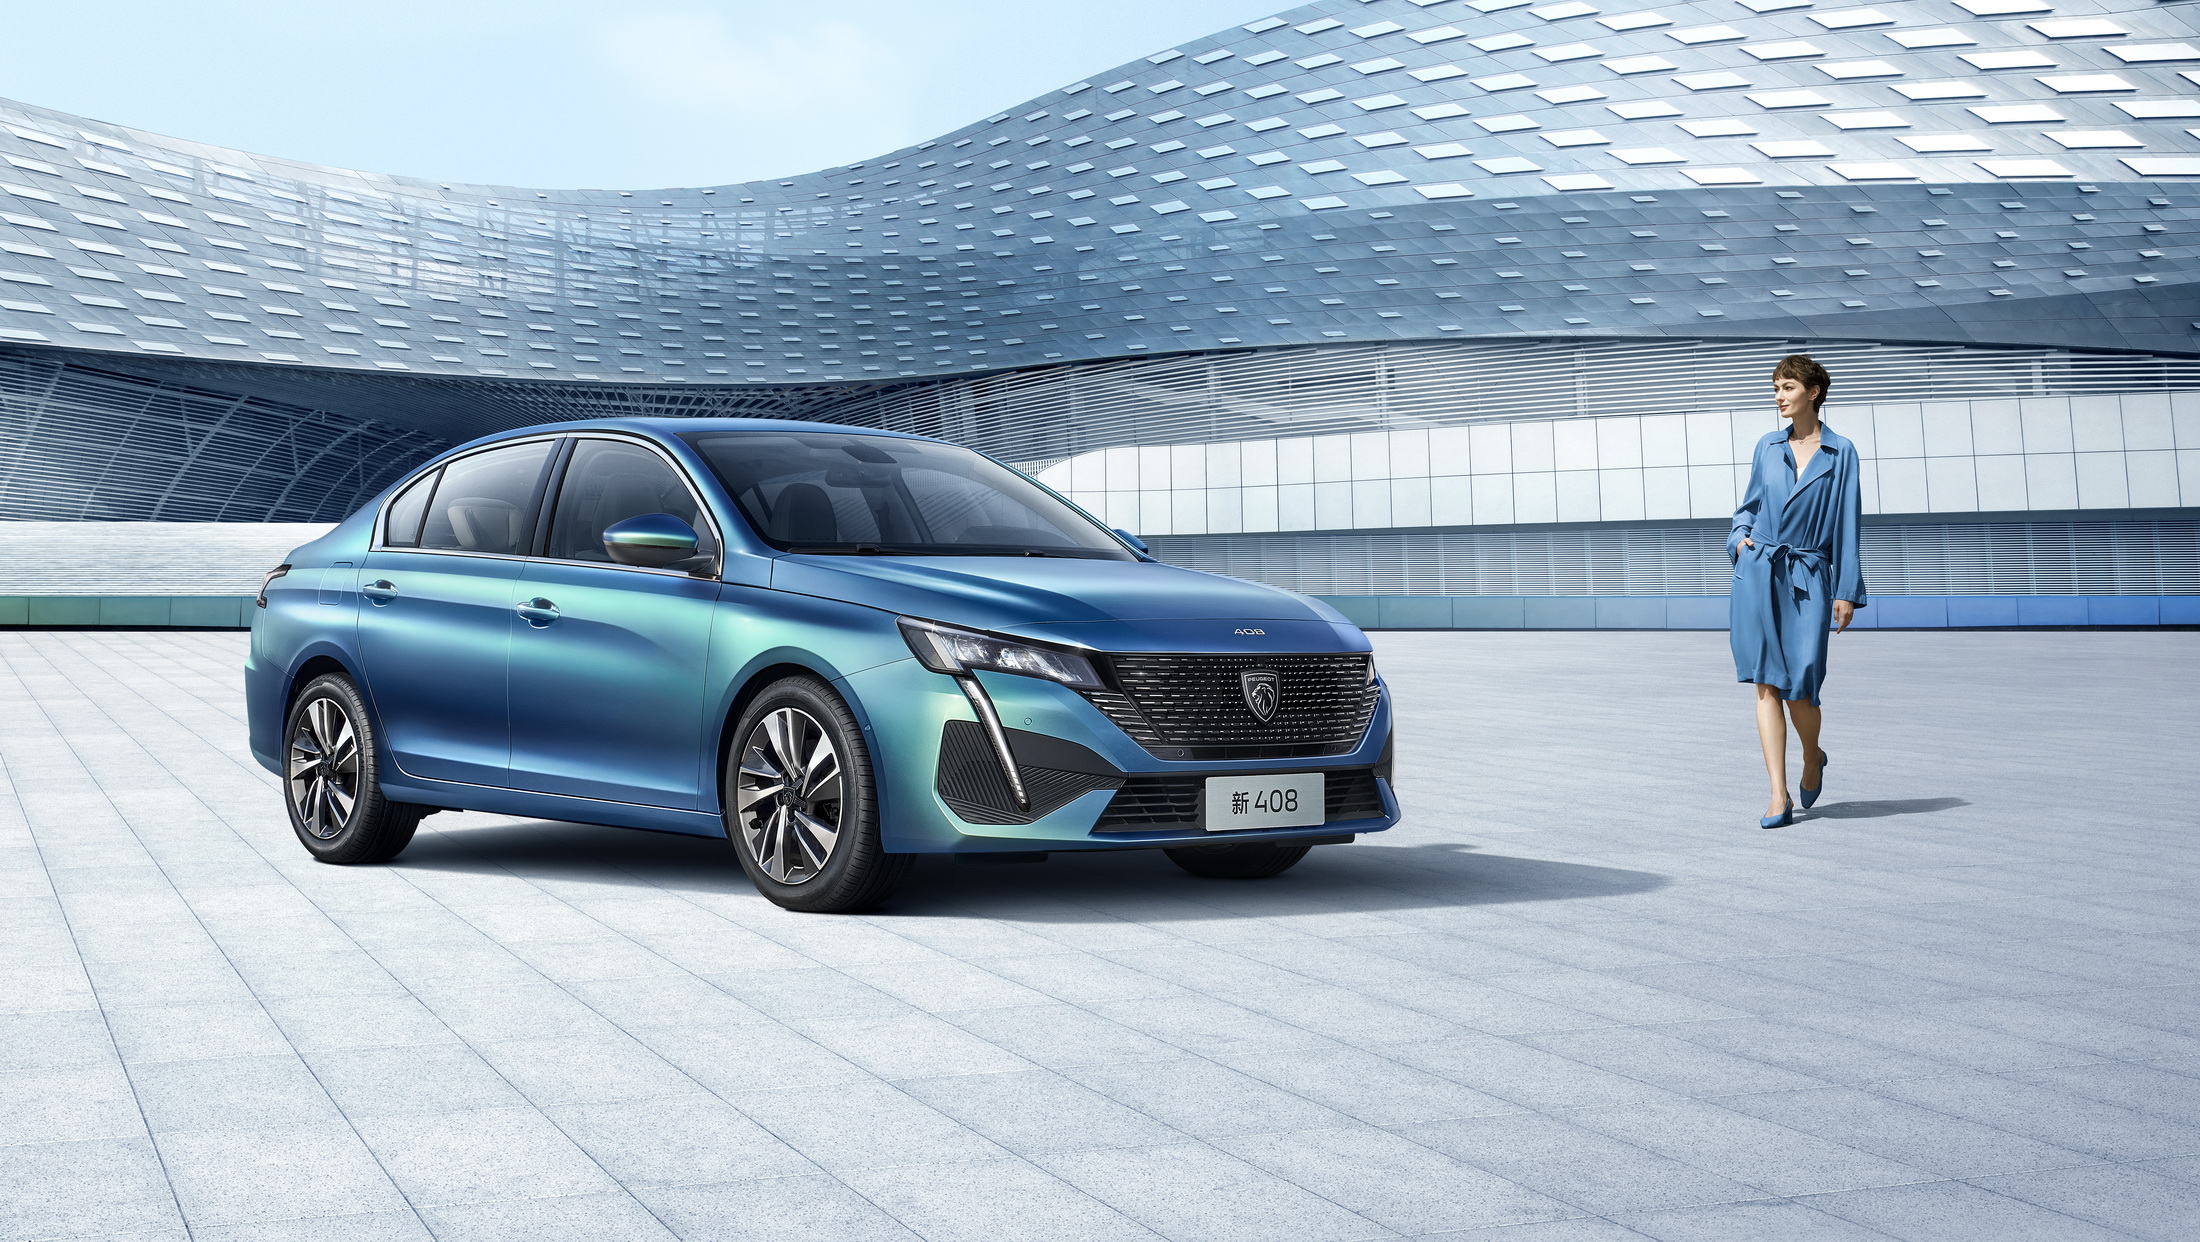 New Peugeot model debuts in China’s Auto Valley with fresh brand image